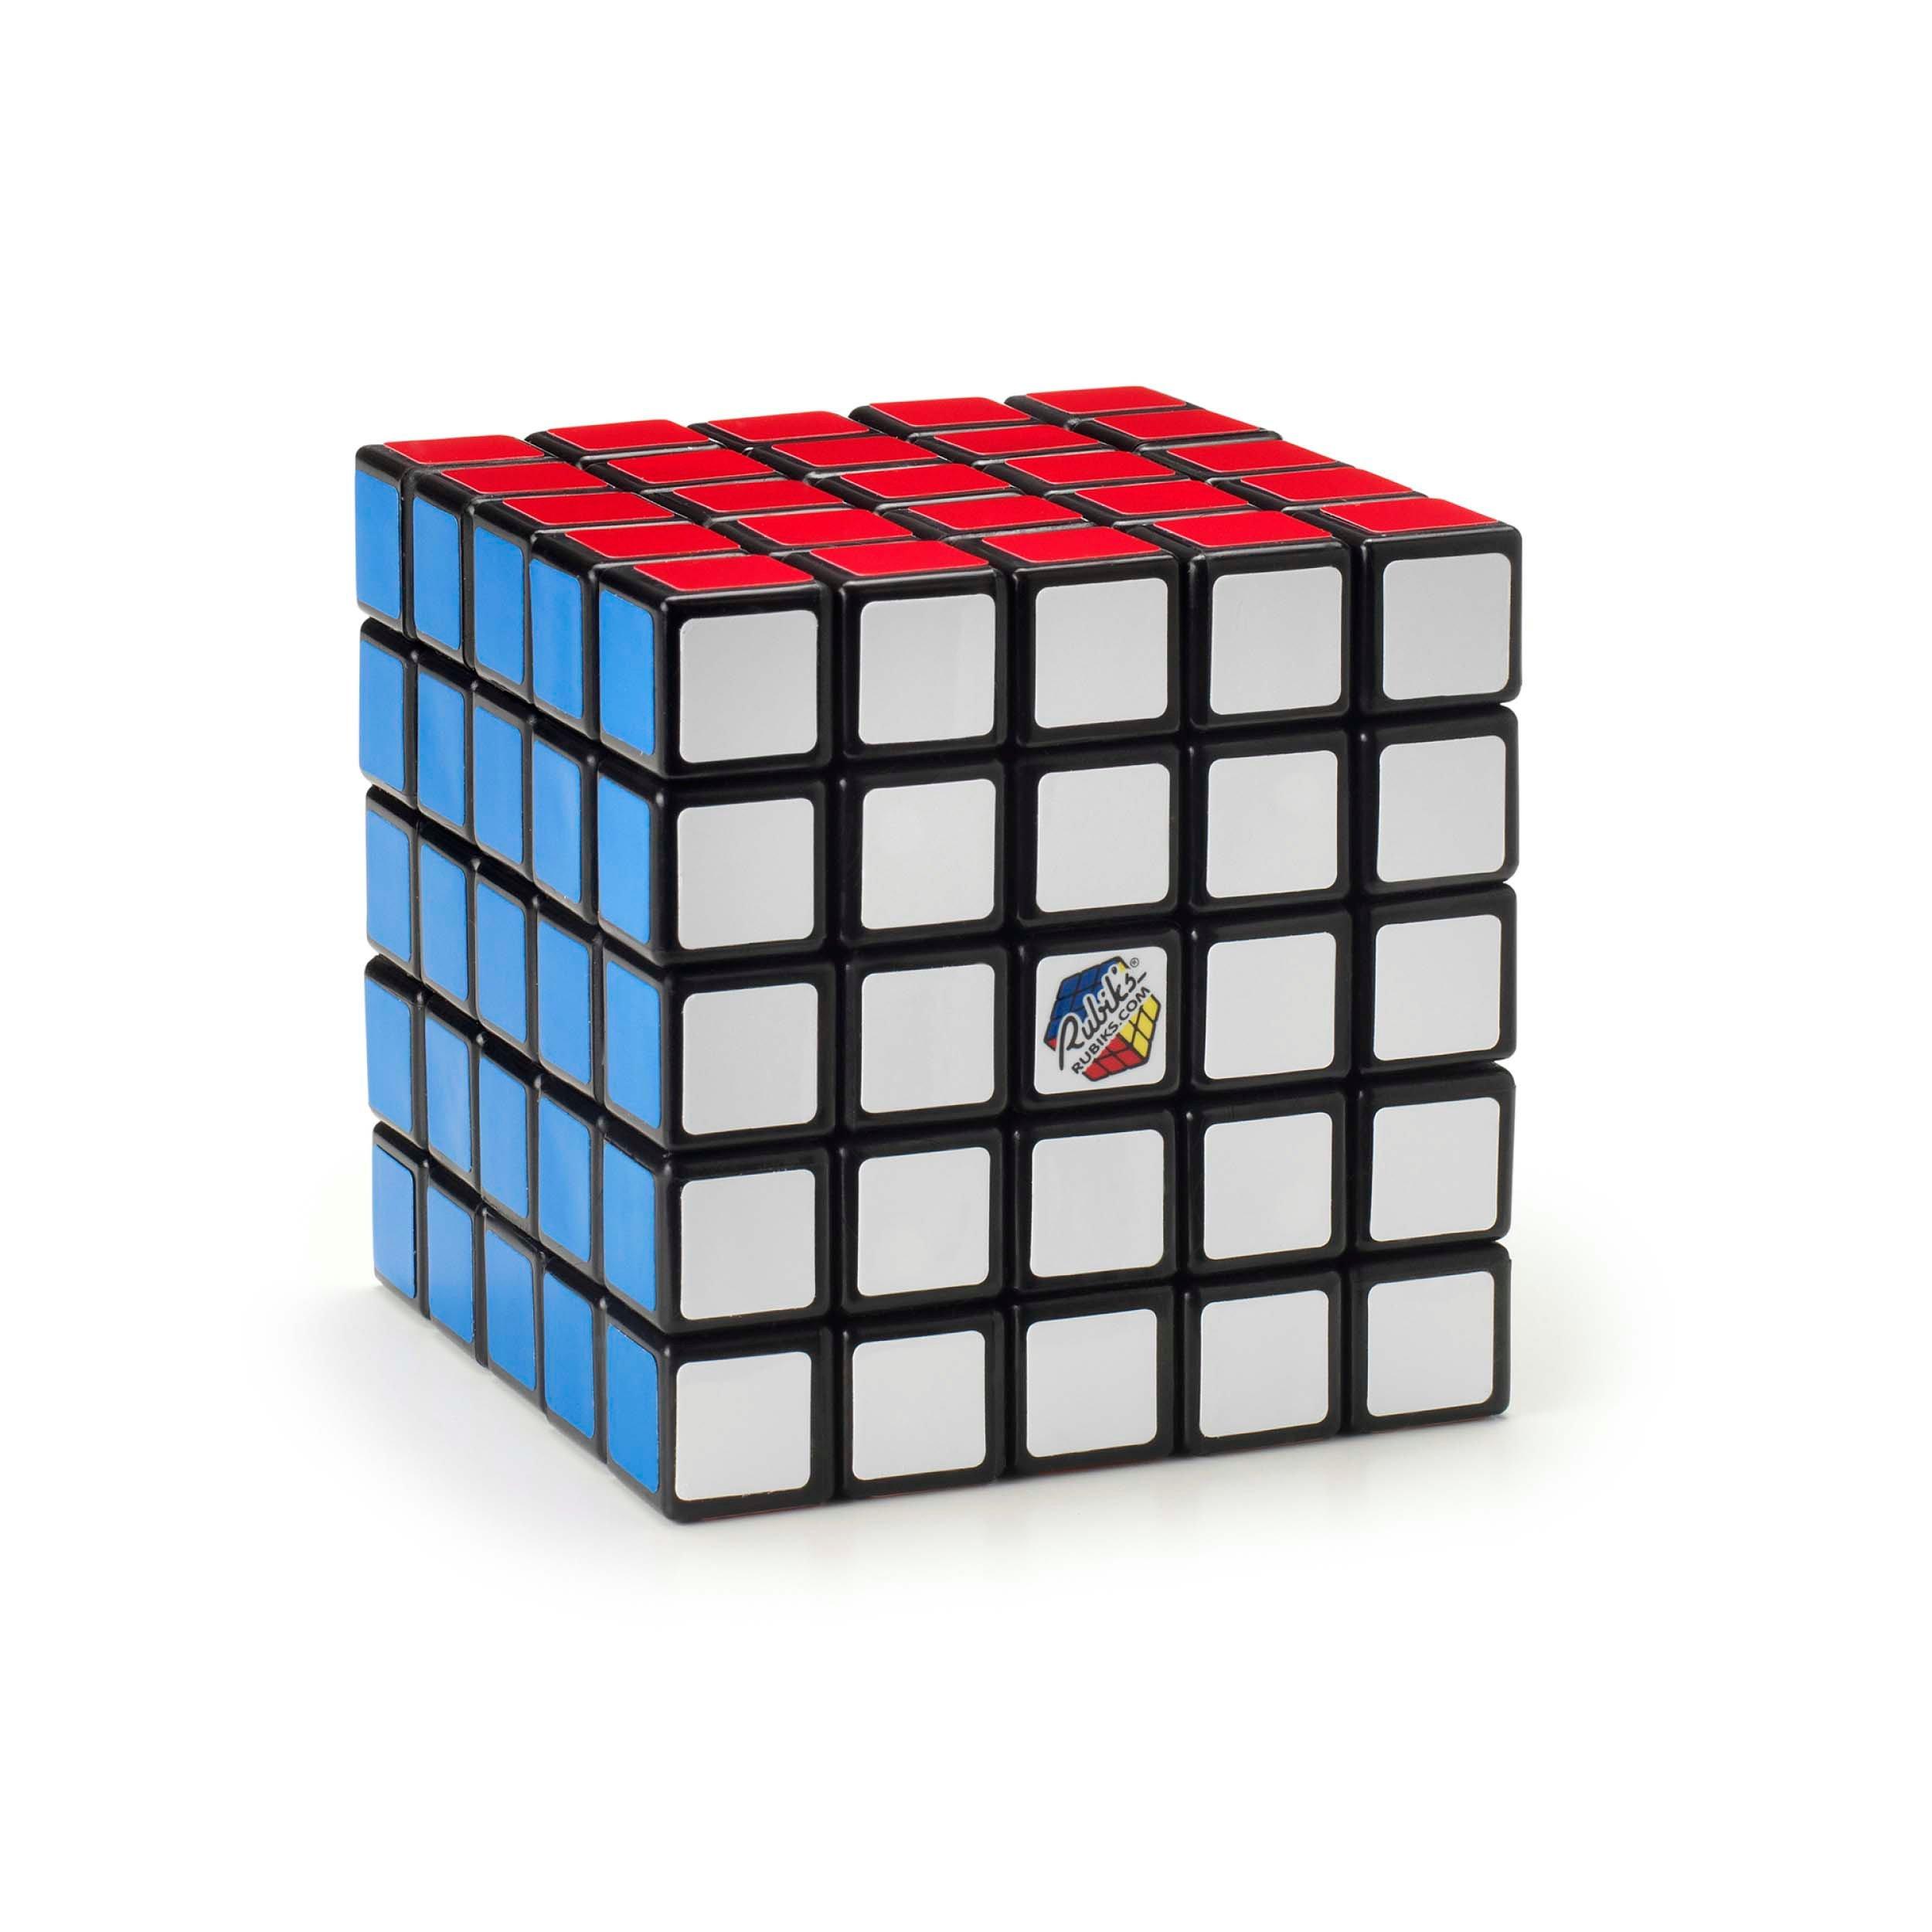 Rubiks Cube 5x5 Super Speed Cube Stickerless Speed Cub Professional Puzzle Game 